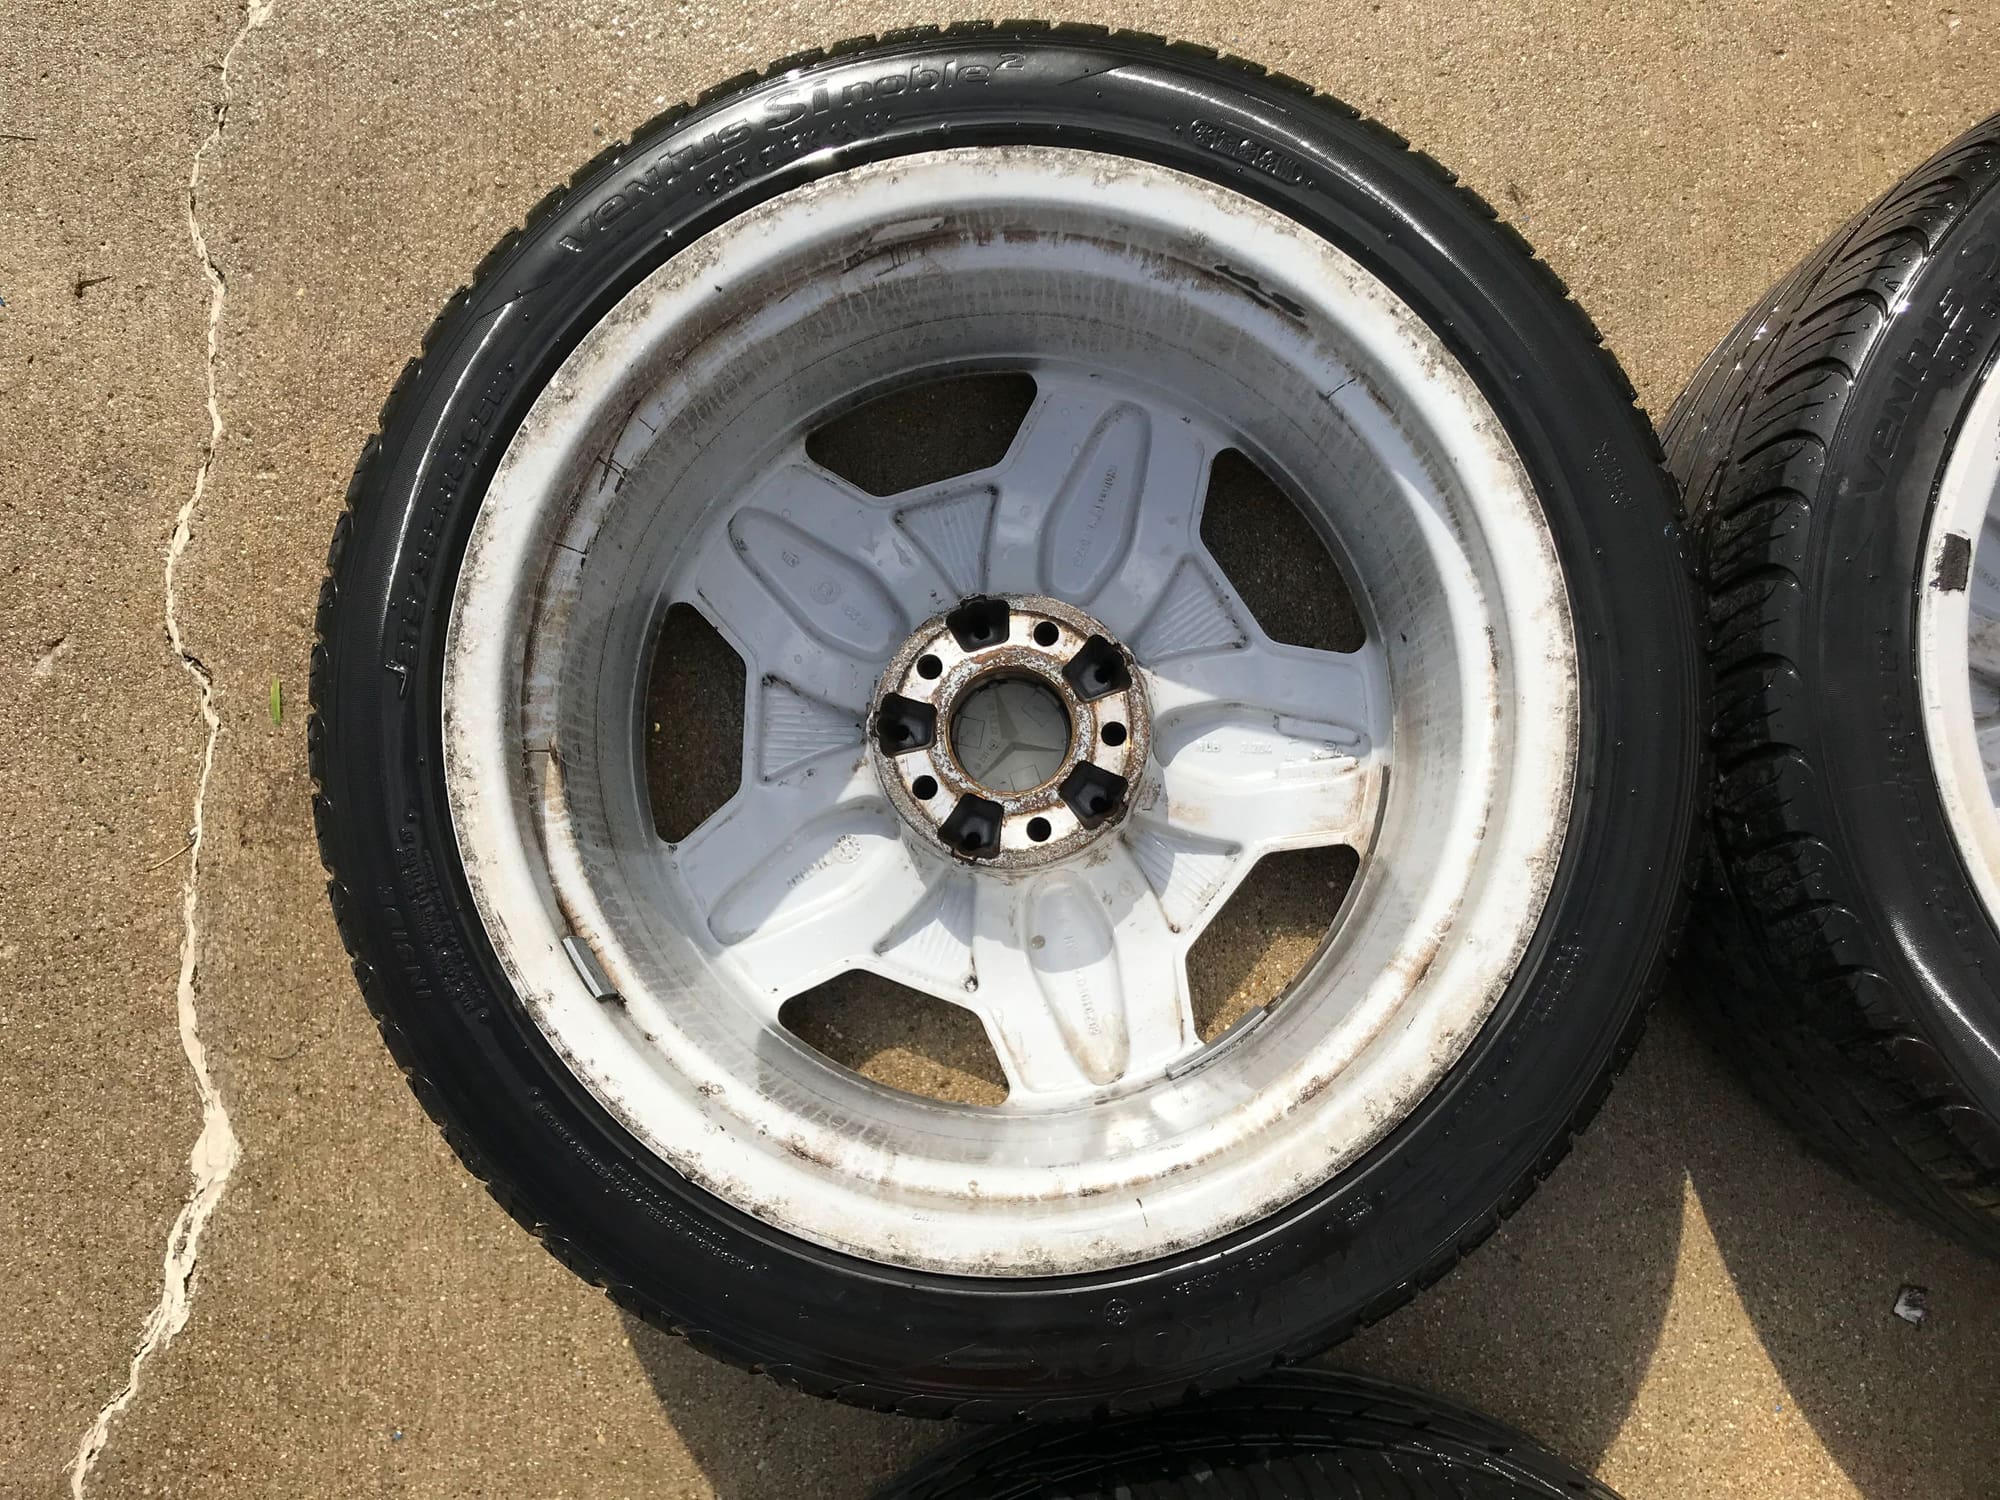 Wheels and Tires/Axles - W210 18" Monoblocks - Used - 1998 to 2002 Mercedes-Benz E55 AMG - 1998 to 2002 Mercedes-Benz E430 - Chicago, IL 60014, United States